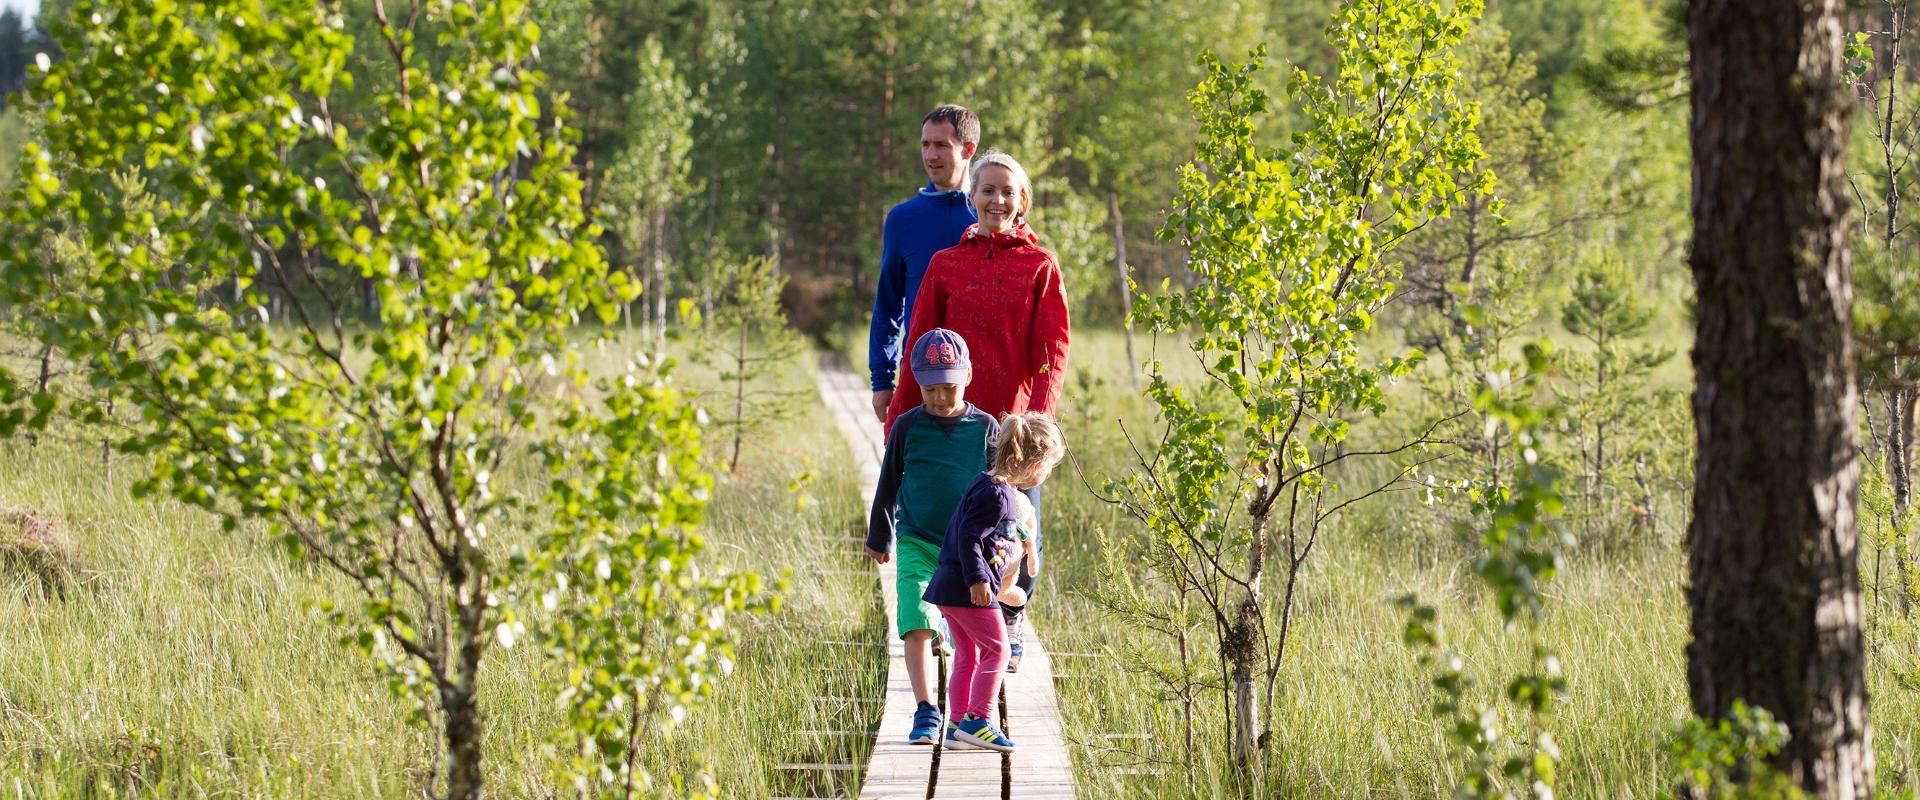 The Kotka hiking trail showcases different types of bogs and other wetland features. It passes by a sand ridge which developed over thousands of years